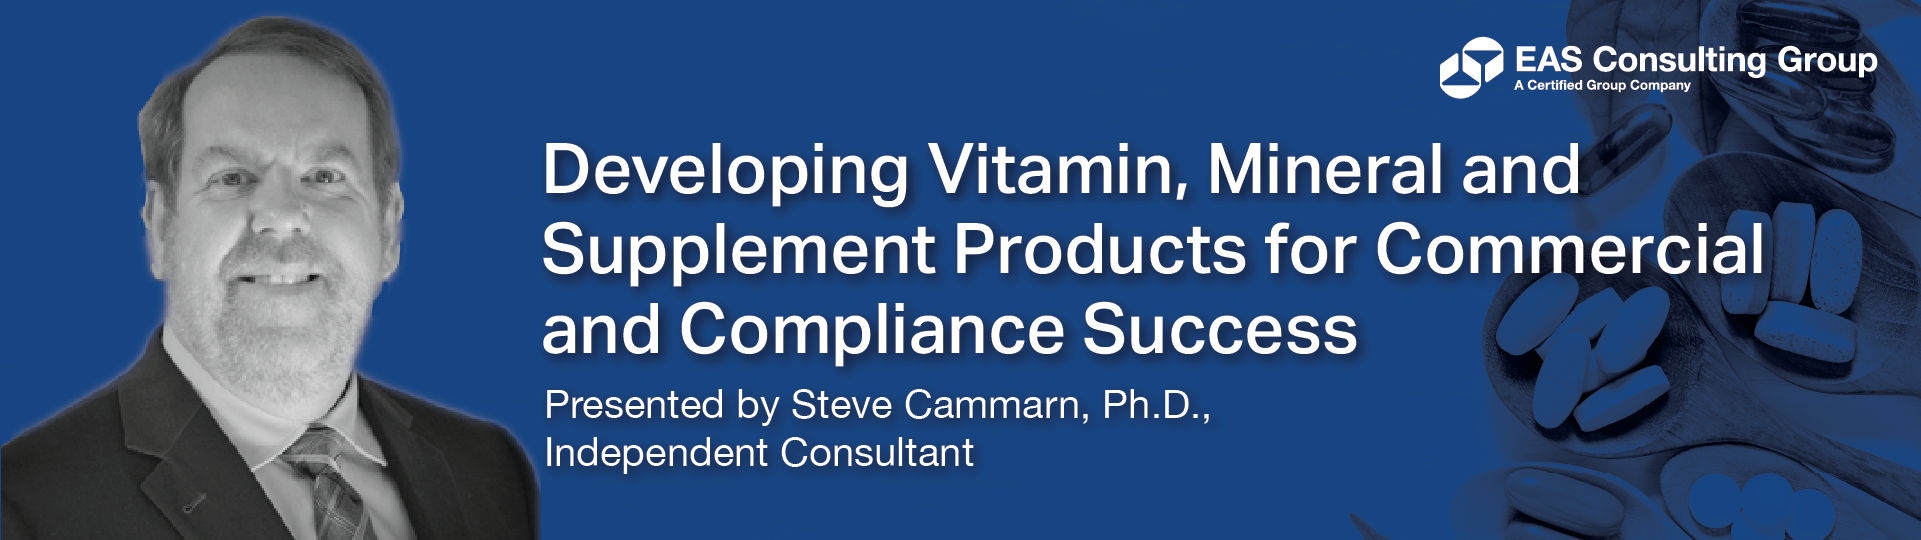 2019 Developing VMS Products for Commercial and Compliance Success (Cammarn)